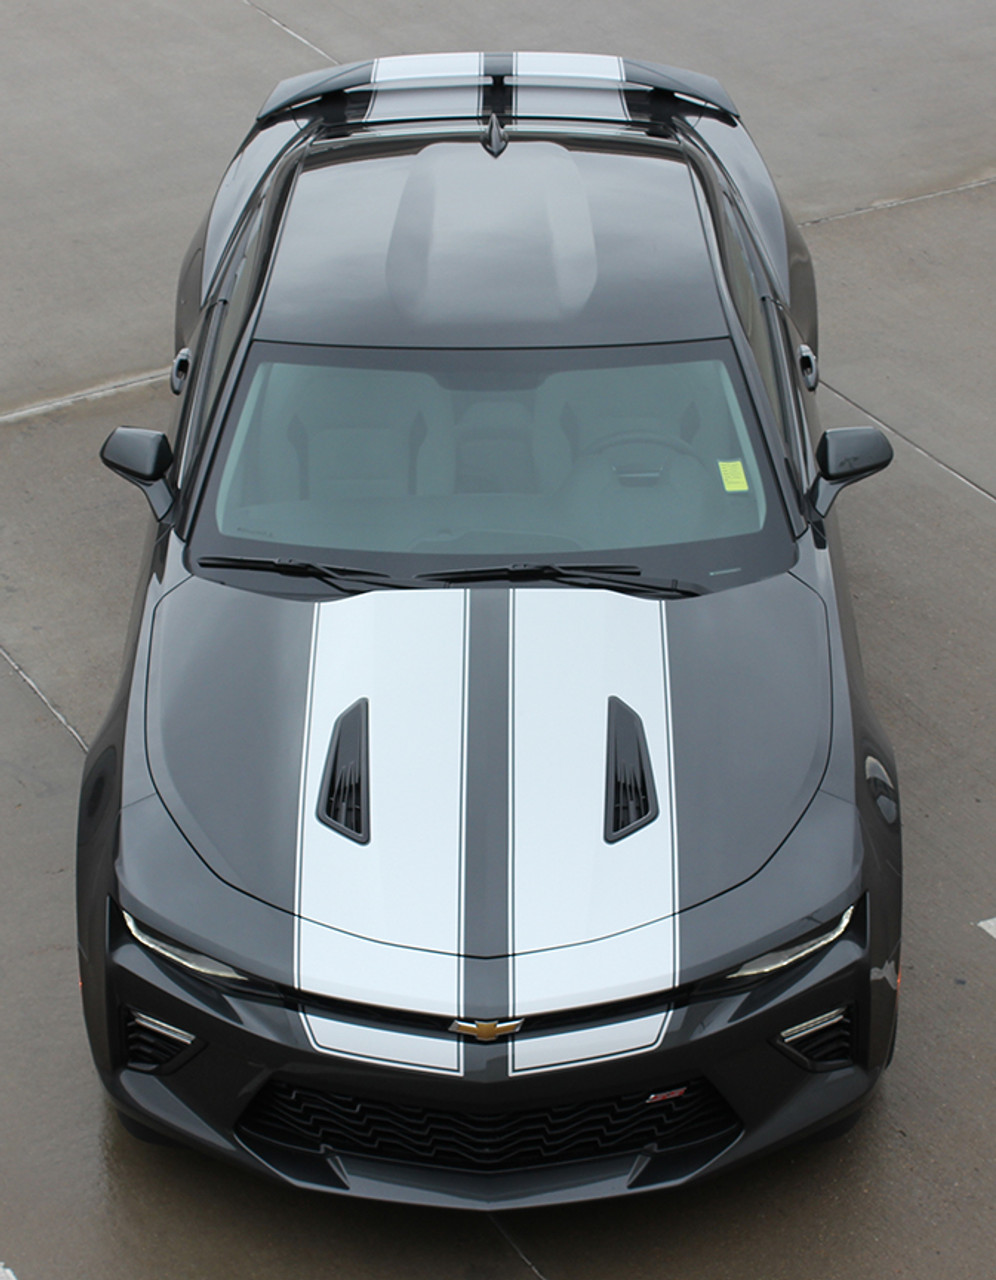 camaro 2022 black with red stripes